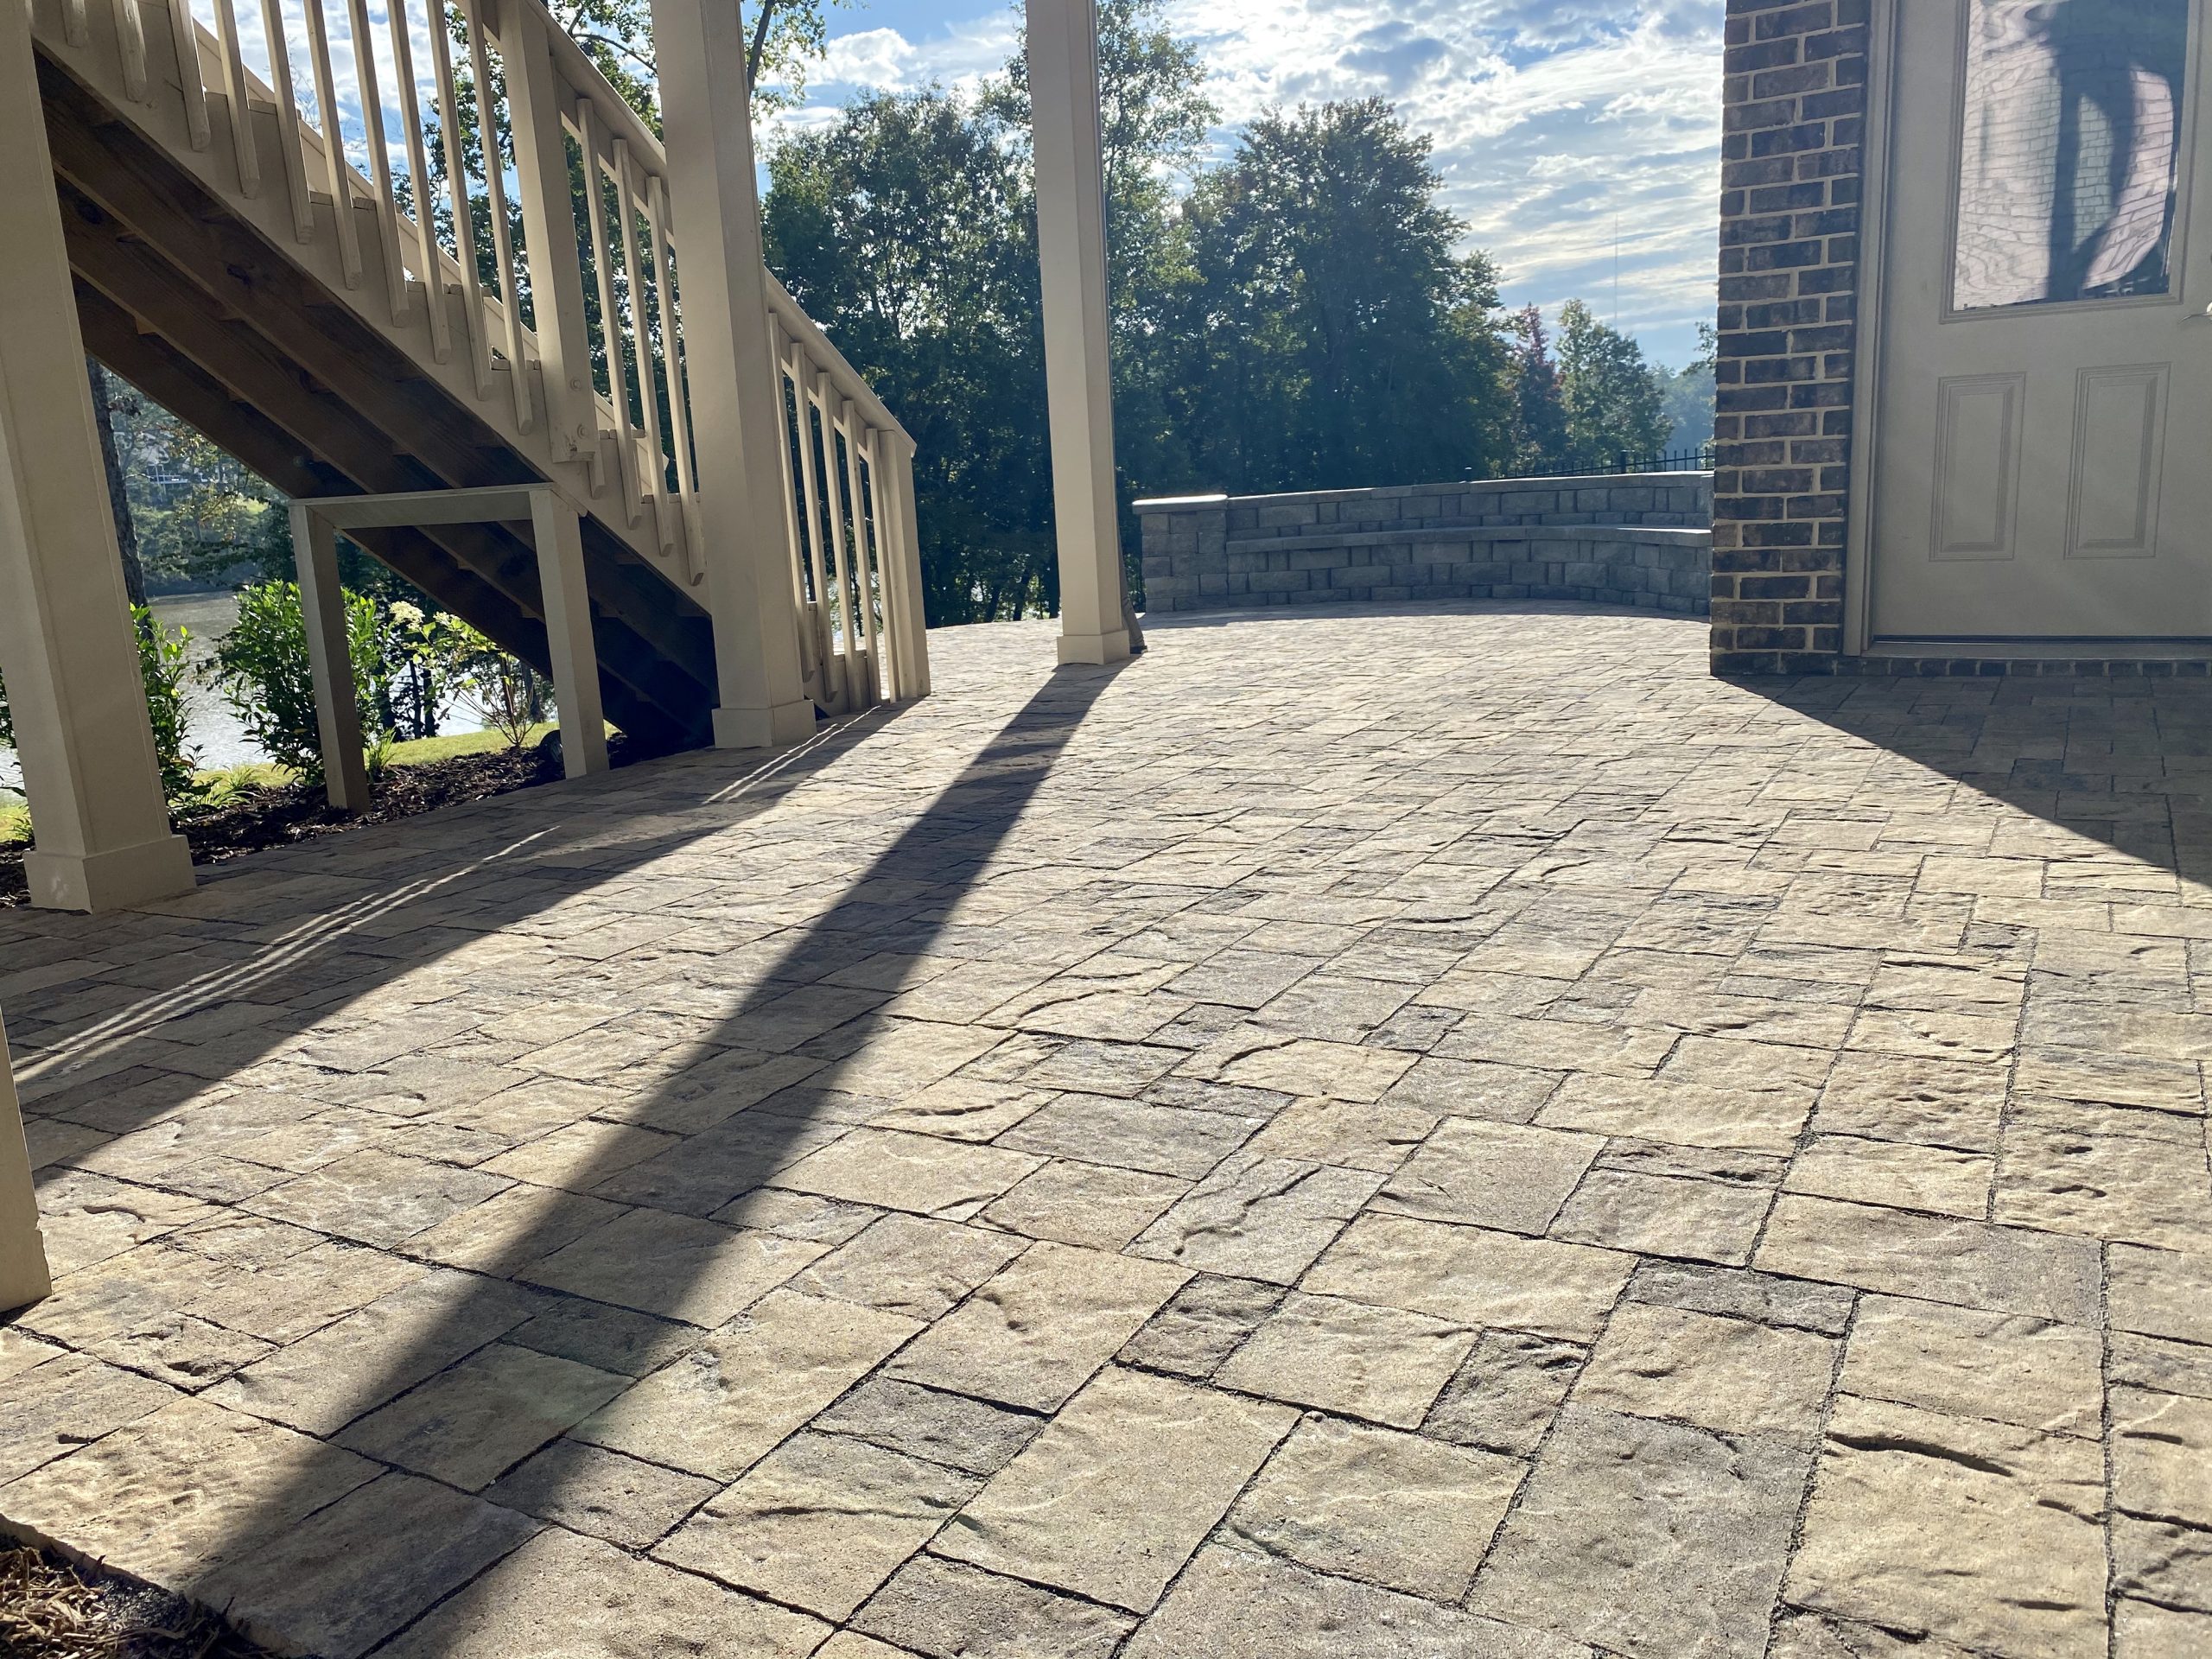 Patio by Sugar Hill Outdoors